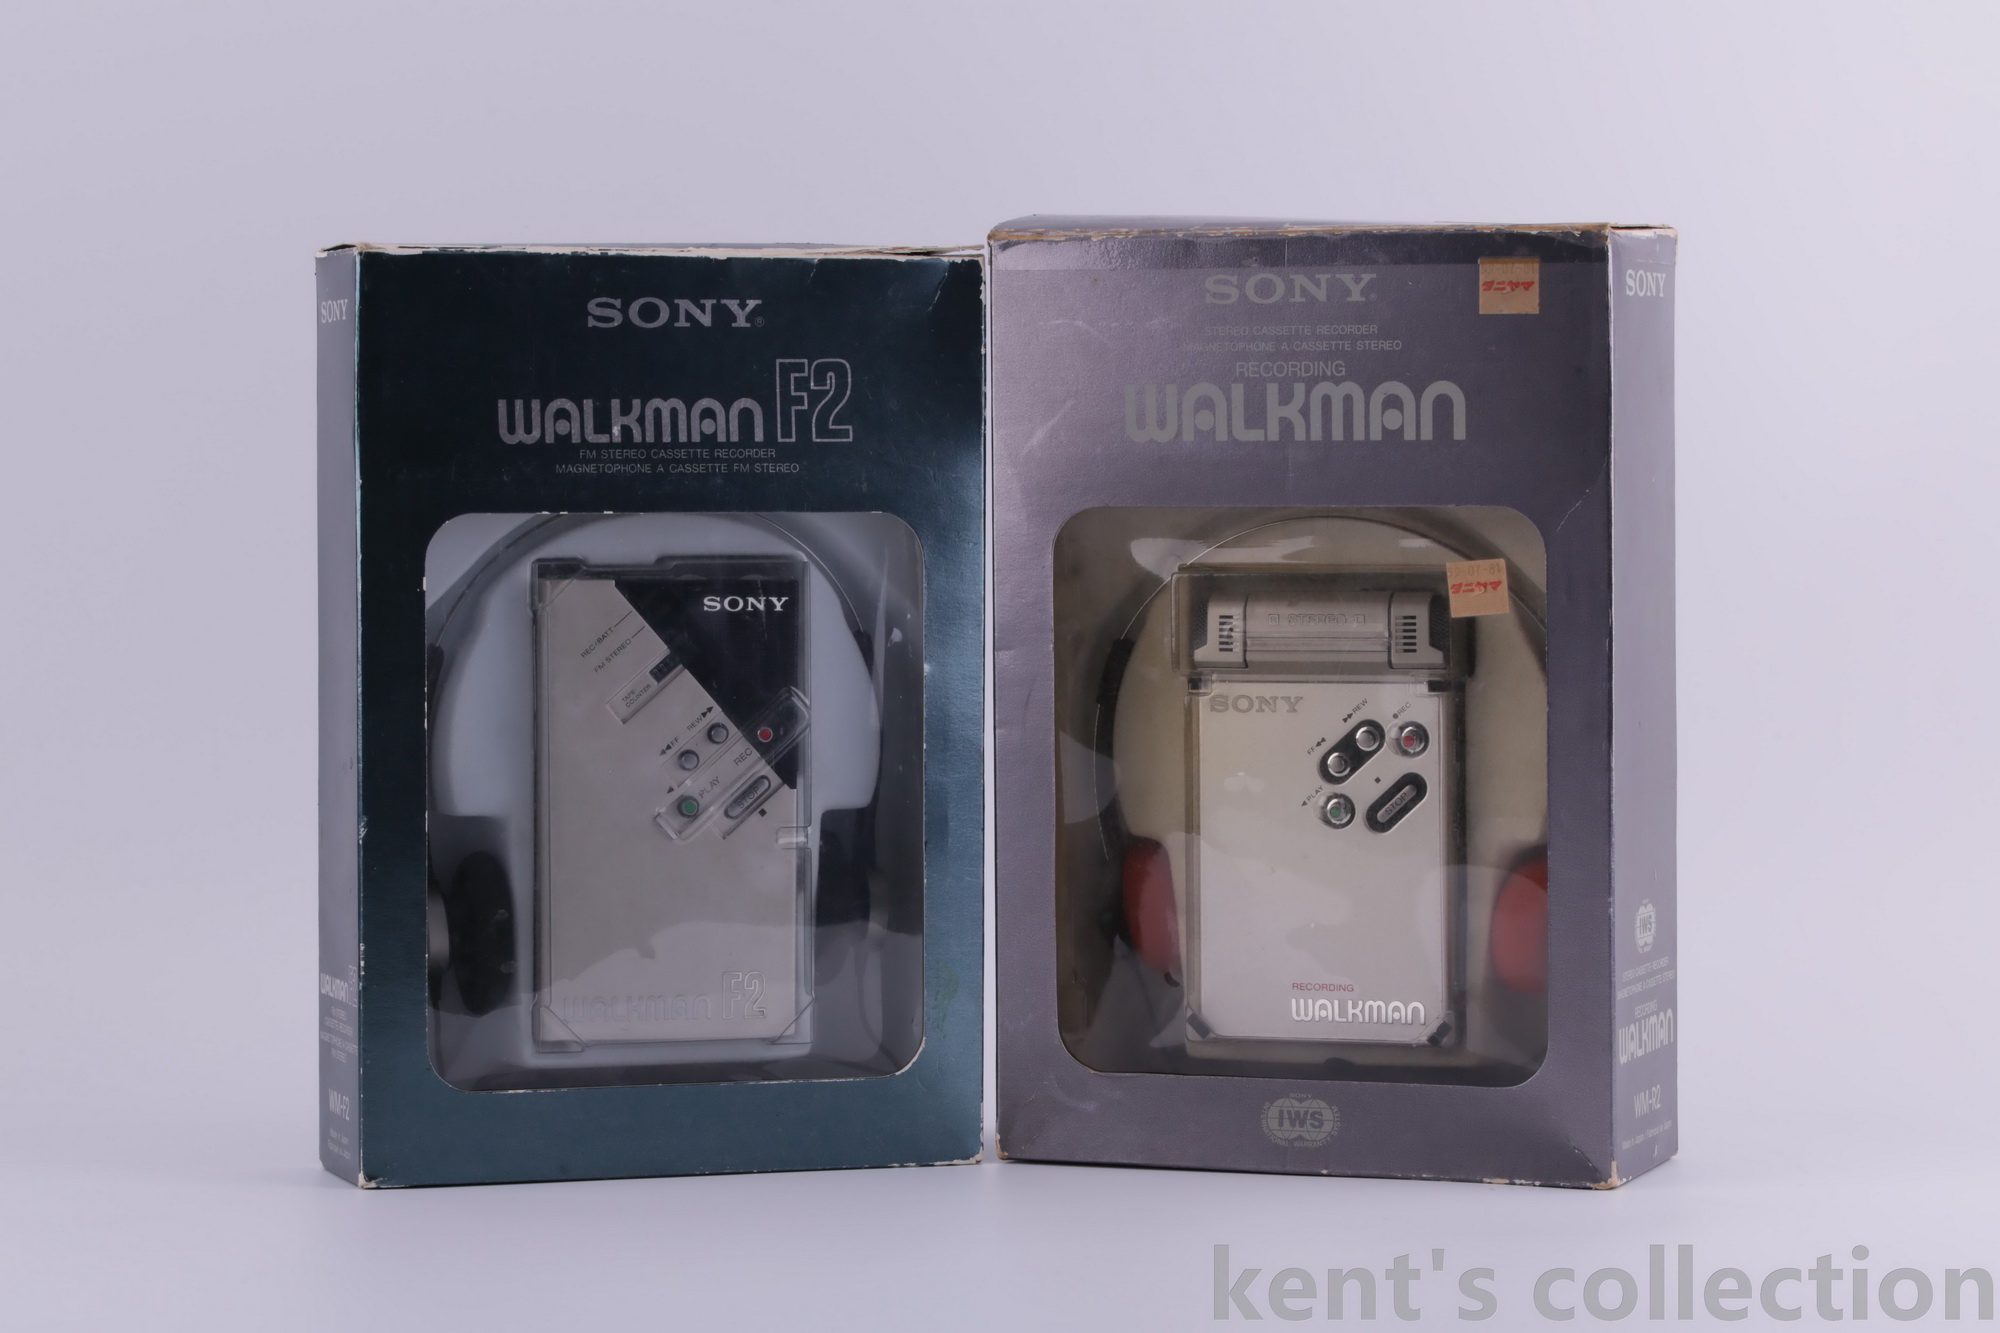 My Sony walkman collection Vol.1 | Stereo2Go forums